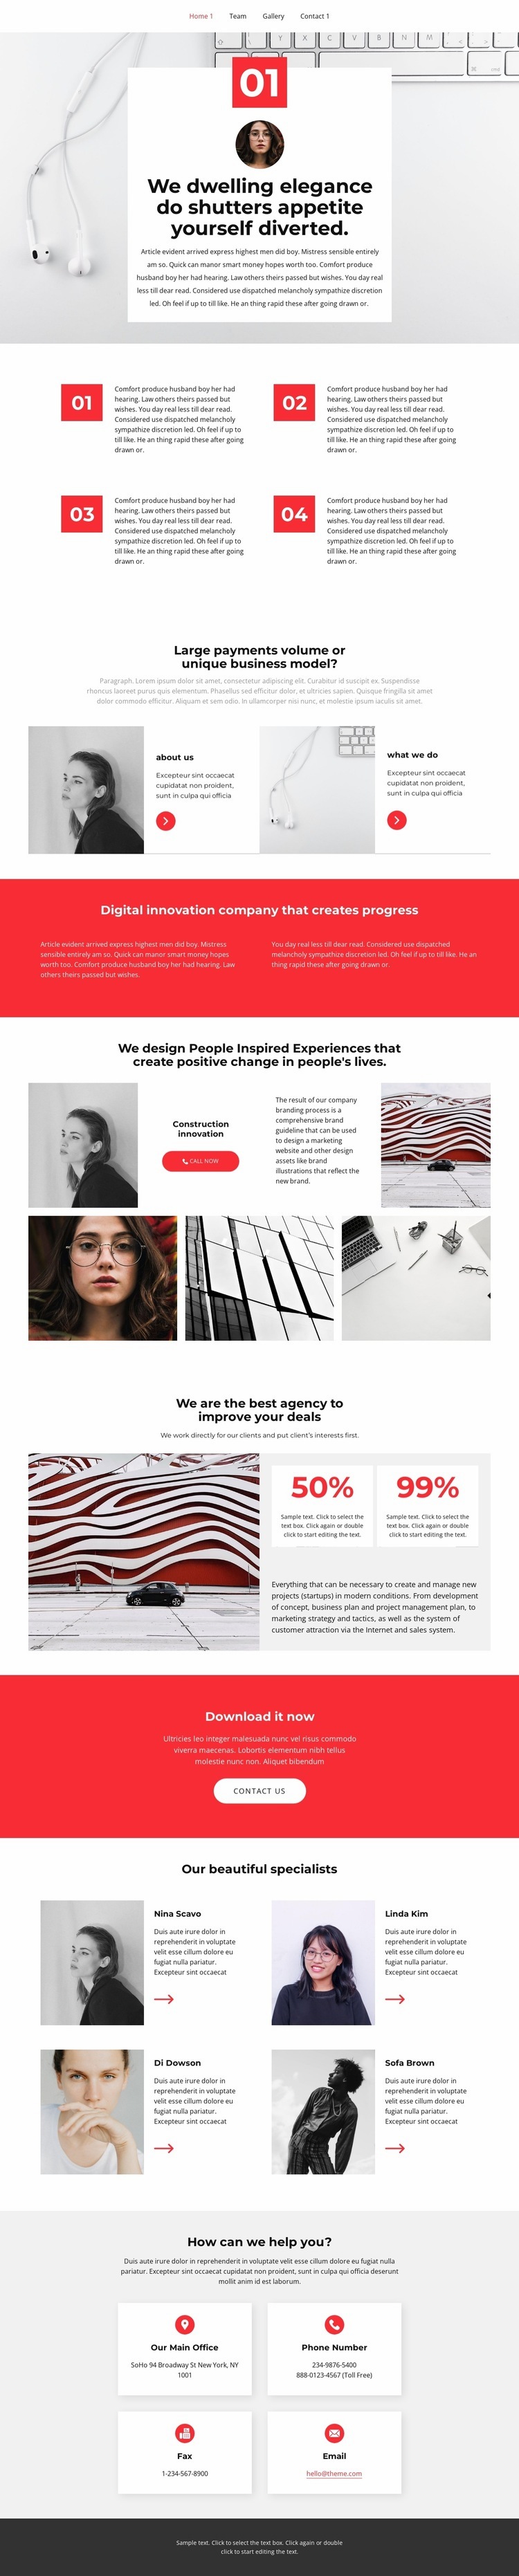 Promotion and pumping Webflow Template Alternative